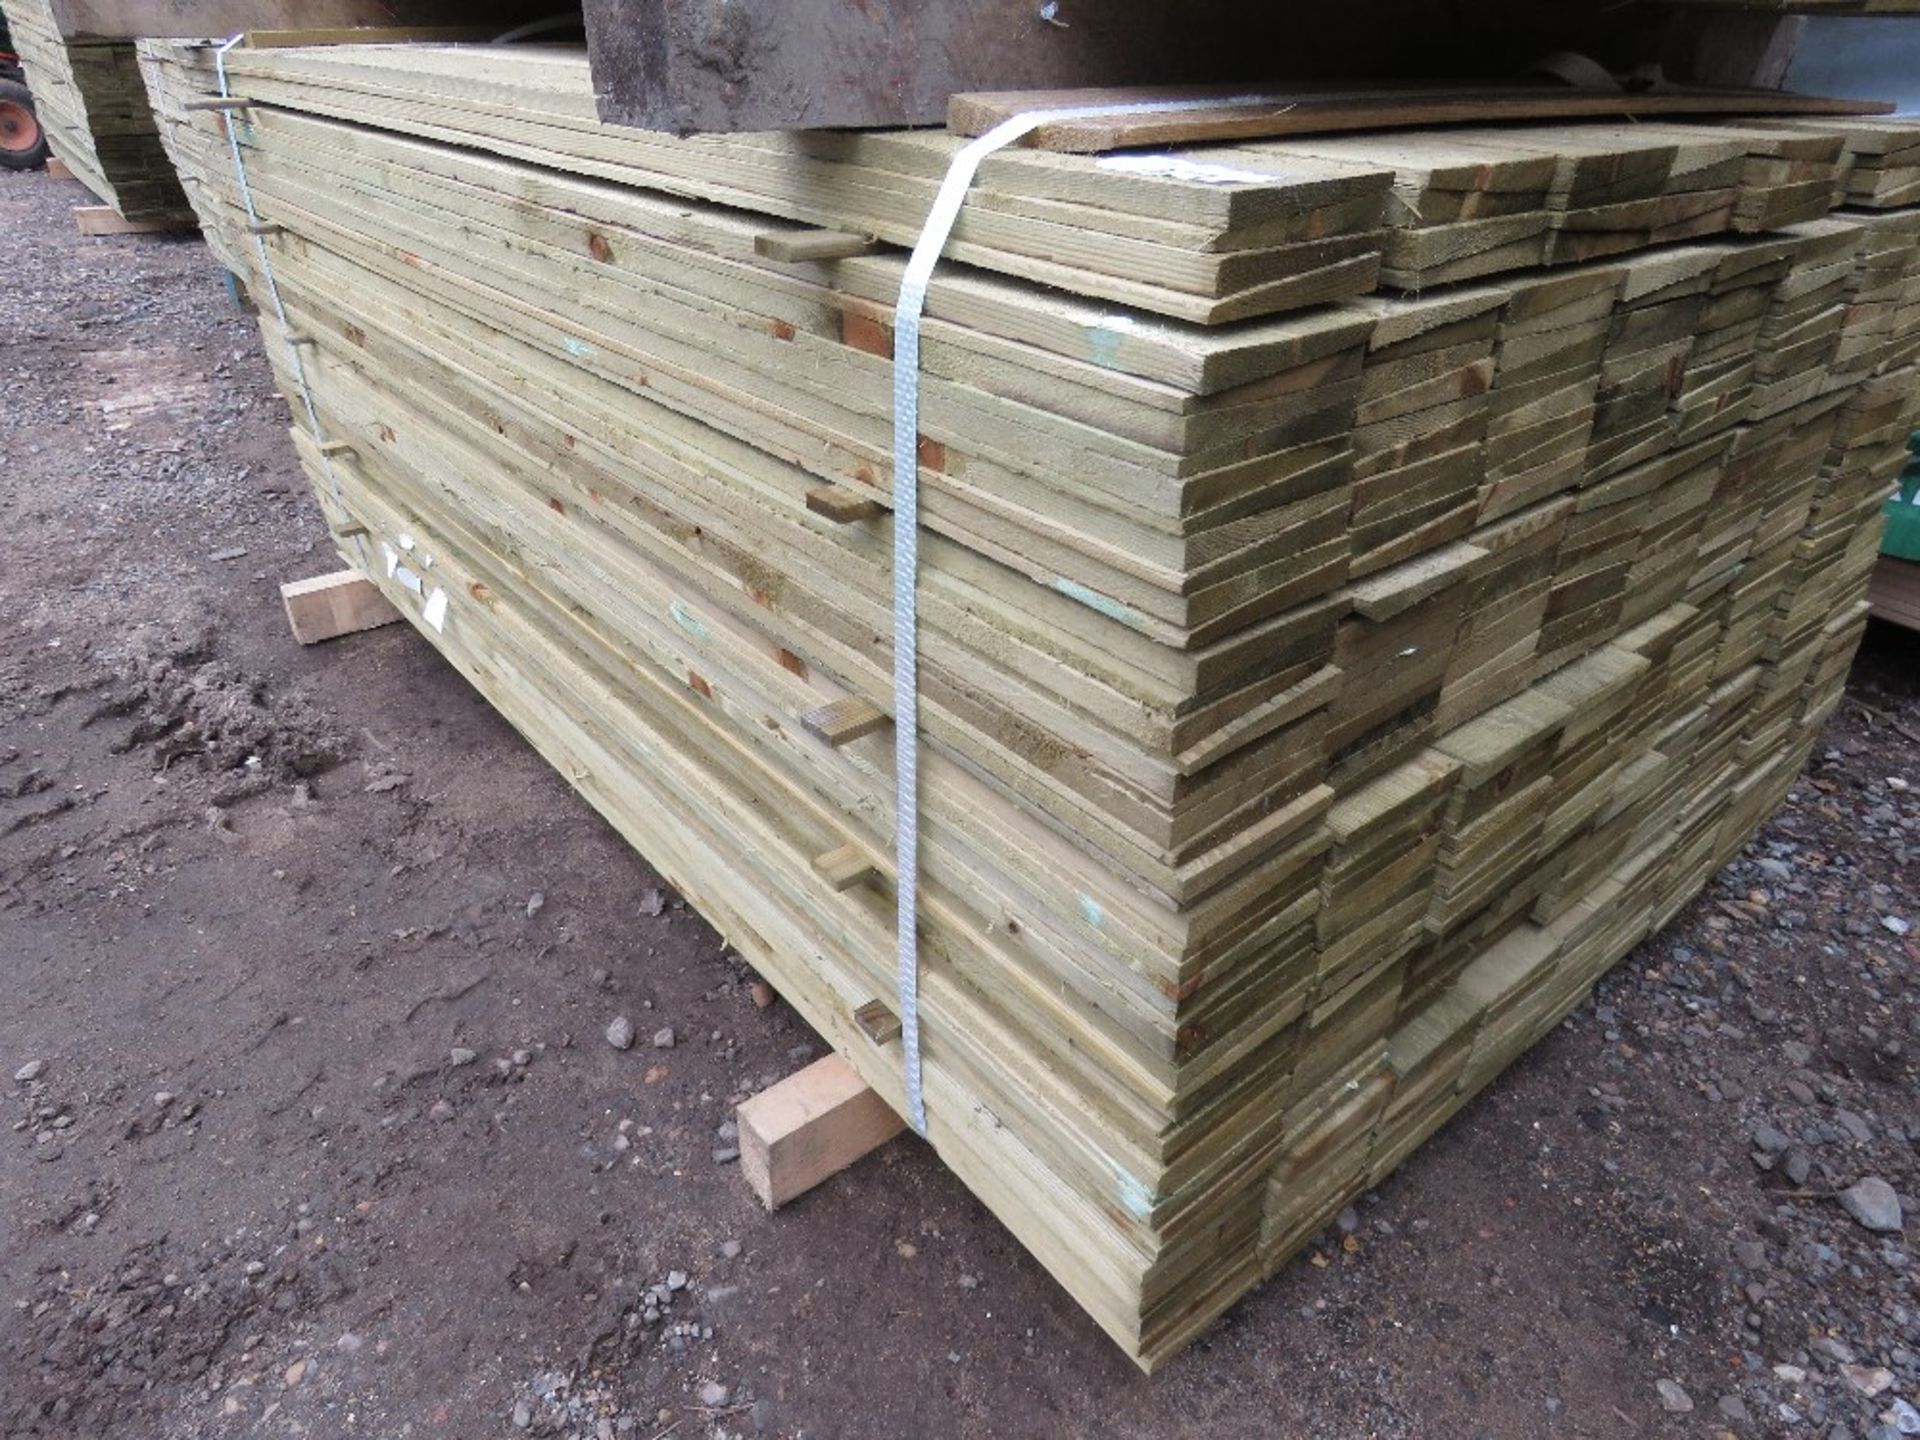 PACK OF PRESSURE TREATED FEATHER EDGE TIMBER FENCE CLADDING BOARDS. SIZE: 1.50M LENGTH X 100MM W